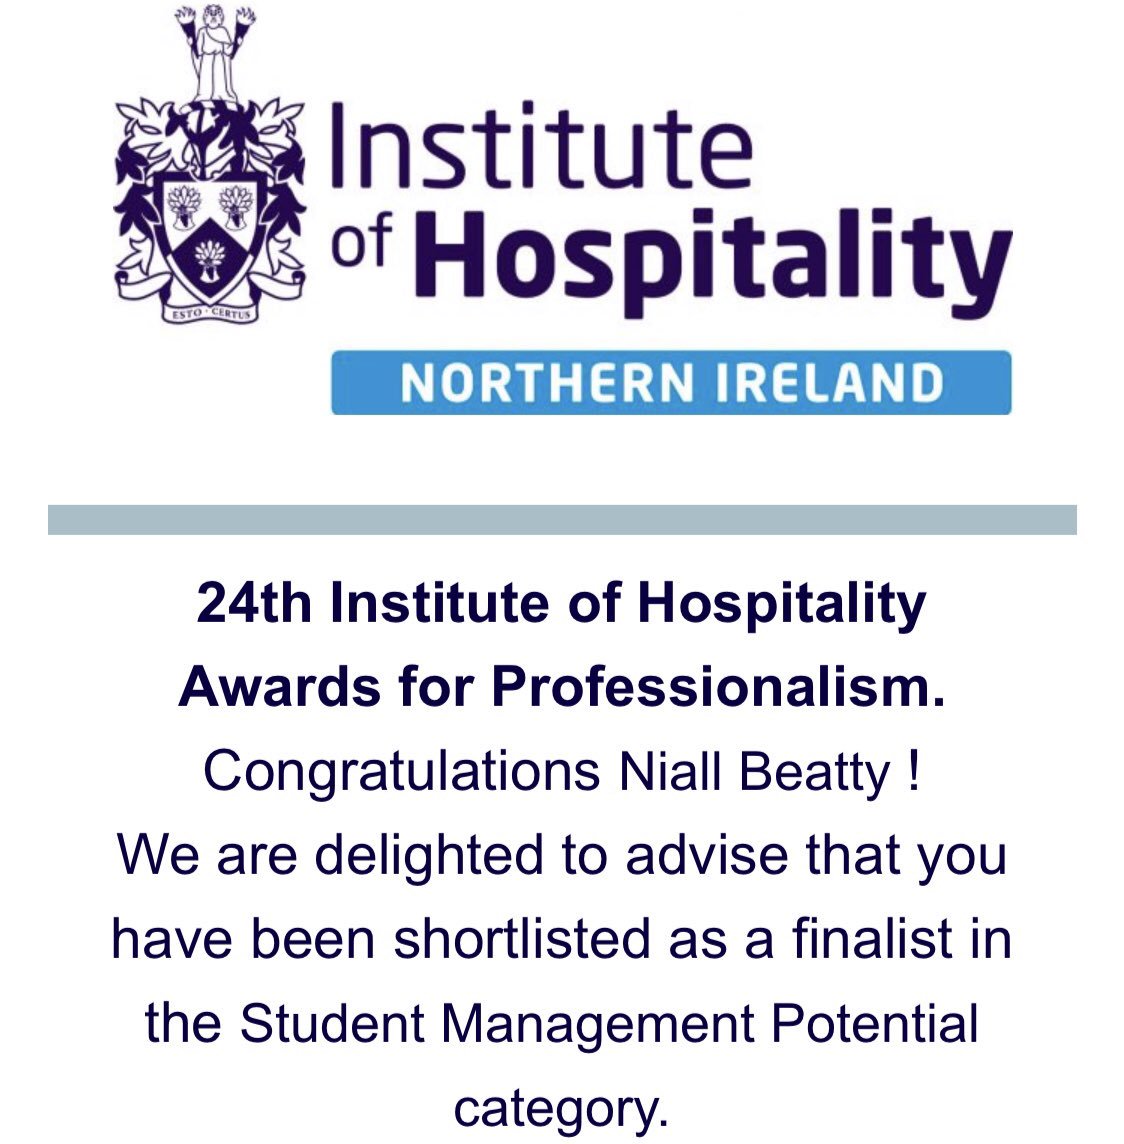 Delighted to be shortlisted as a finalist for the @IoH_NI Student Management Potential Award representing @UlsterBizSchool. #IHMUUBS